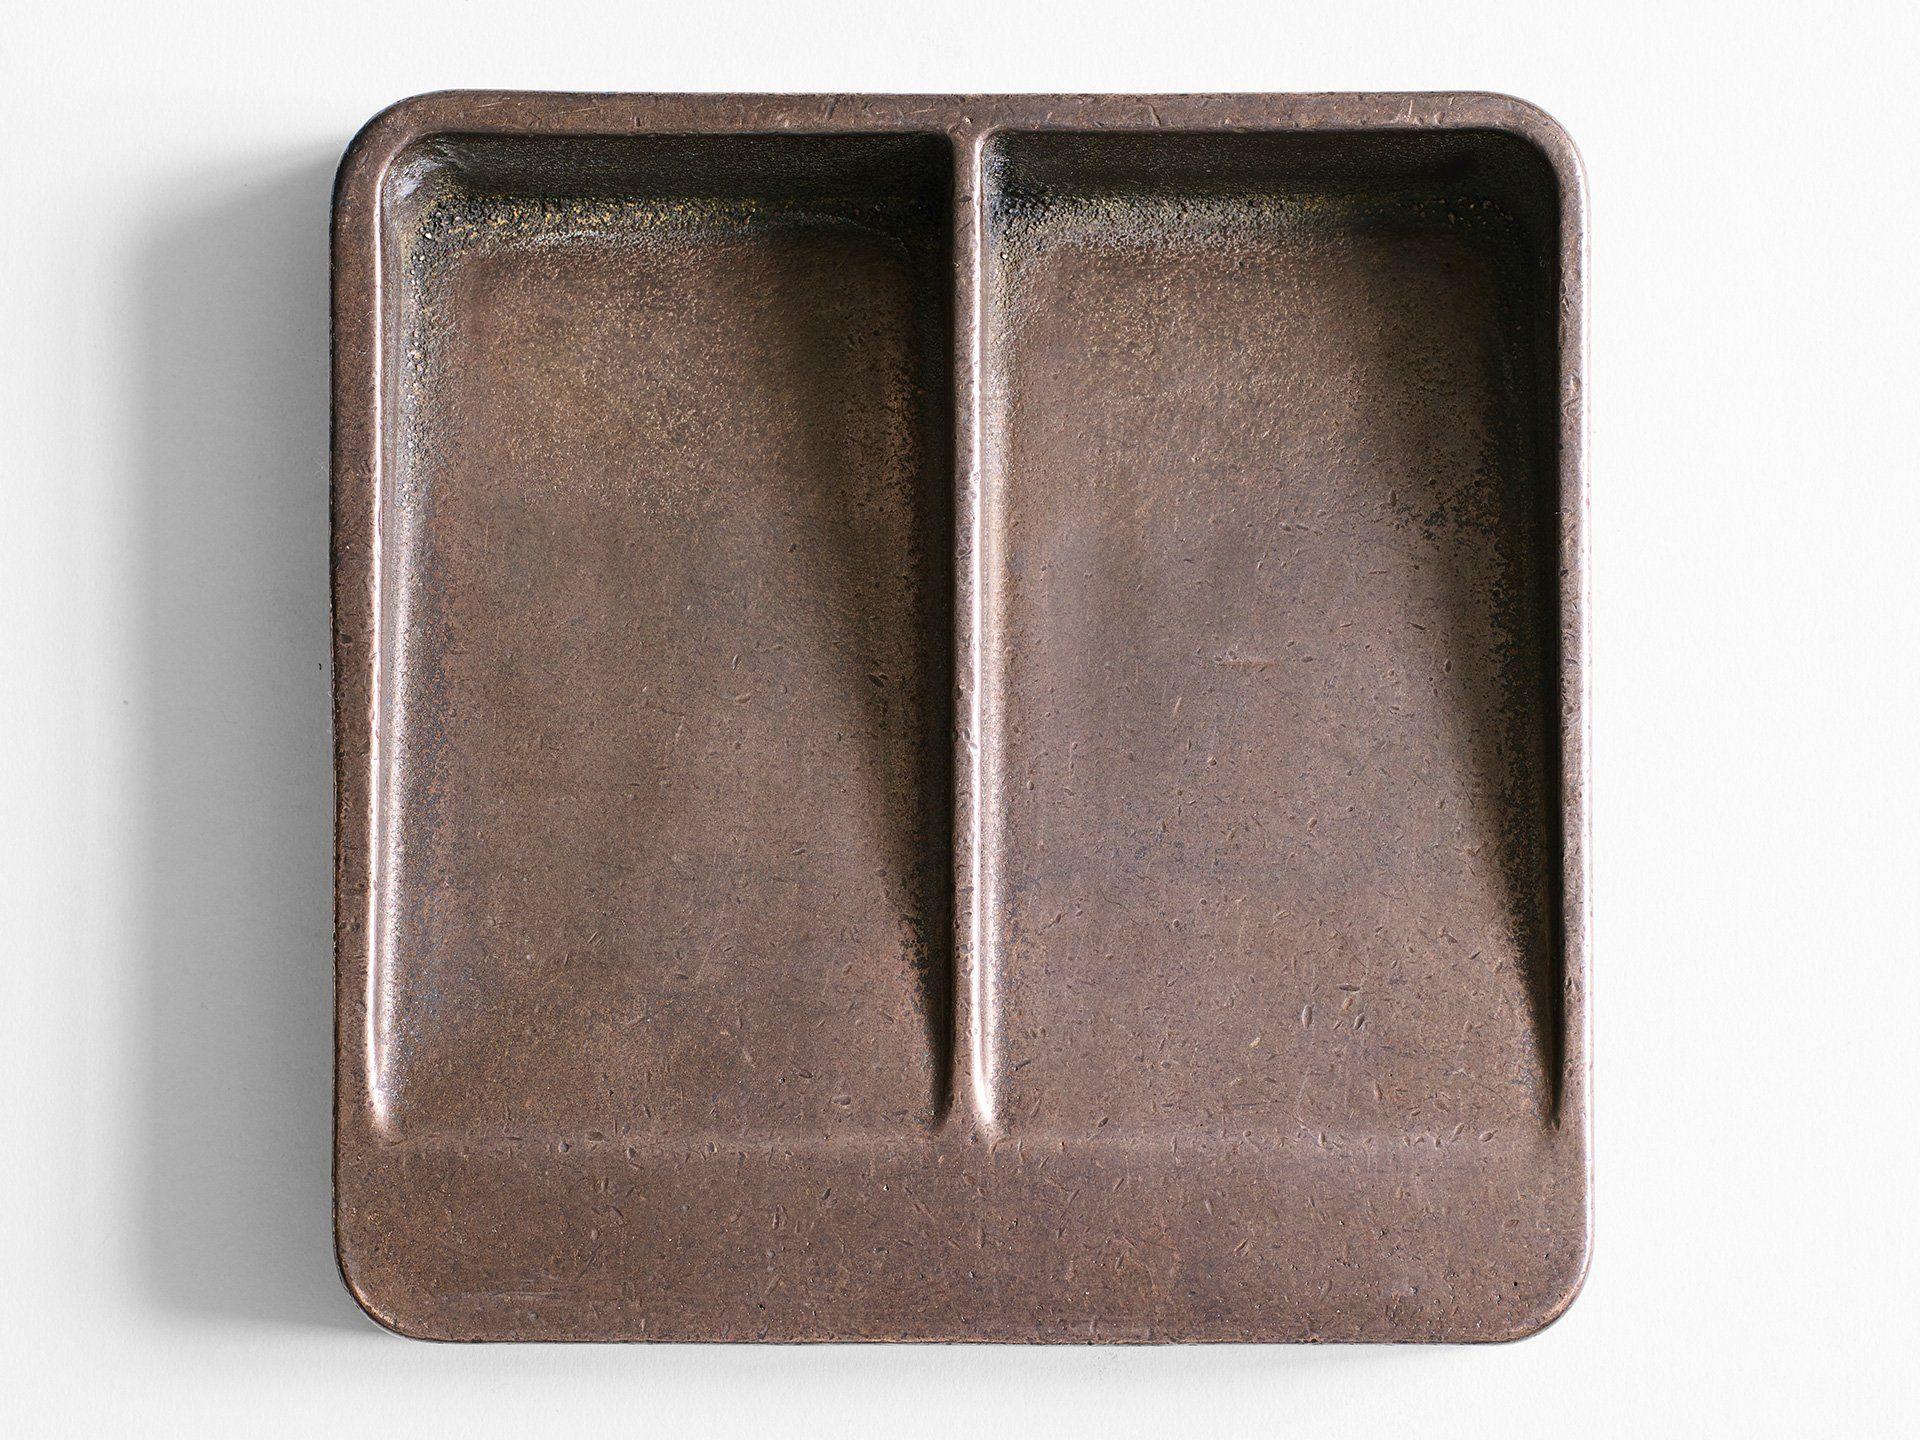 Blackened Vide Poche Square by Henry Wilson
Dimensions: W 18 x D 18 x H 4 cm
Materials: Bronze


The Vide Poche is designed with your loose-pocket items in mind, think keys, change and phone. It is made, polished and finished in Sydney, Australia in